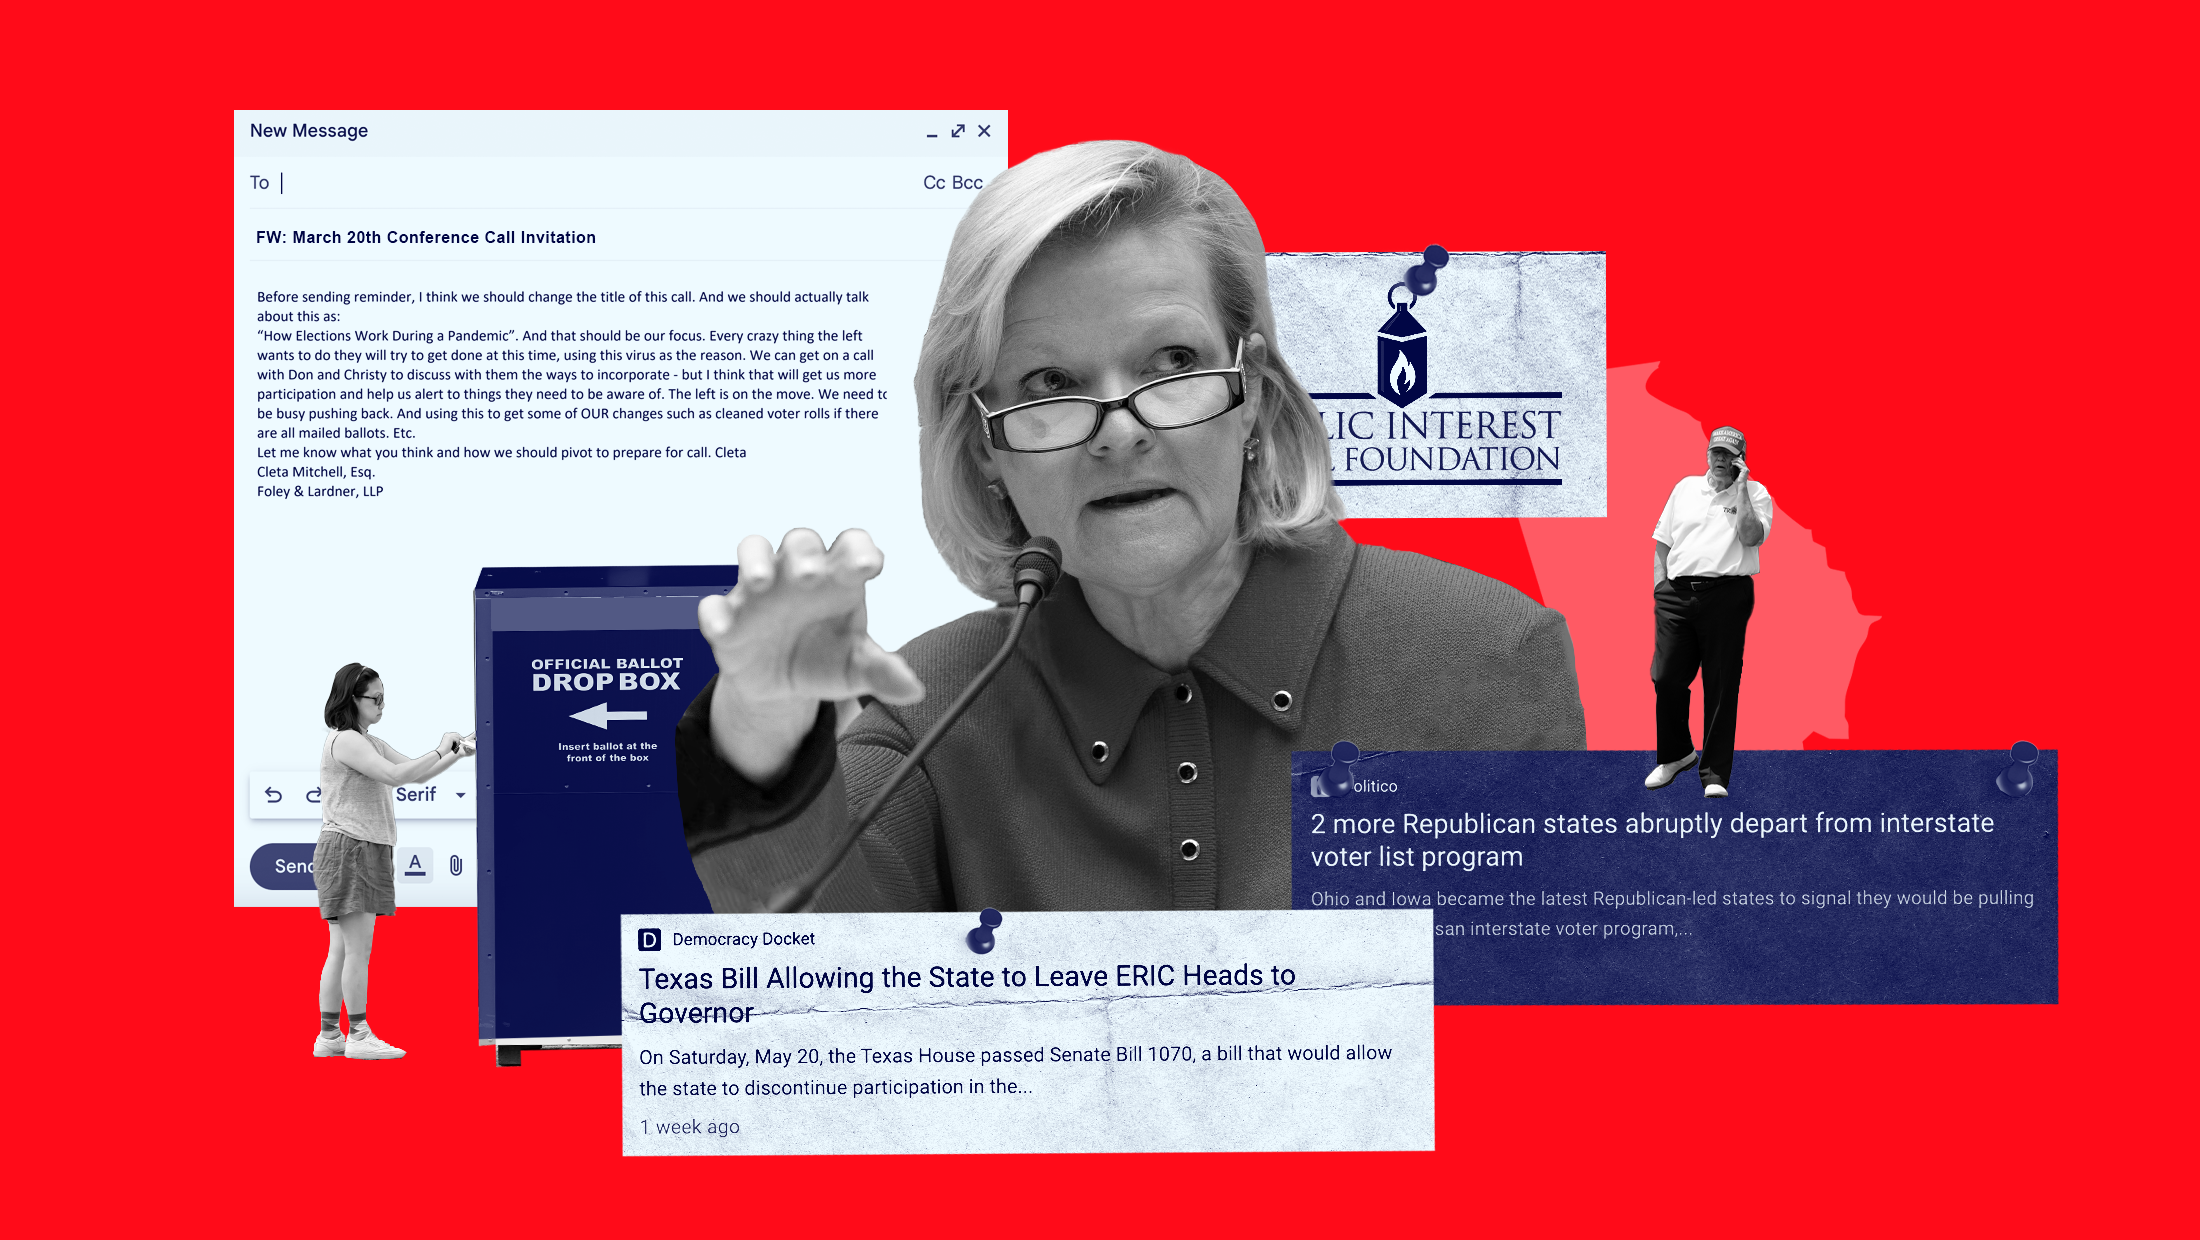 Cleta Mitchell on a red background surrounded by a drop box, excerpts from news reports about states leaving ERIC, the logo of PILF and an email she sent about restricting mail-in voting.